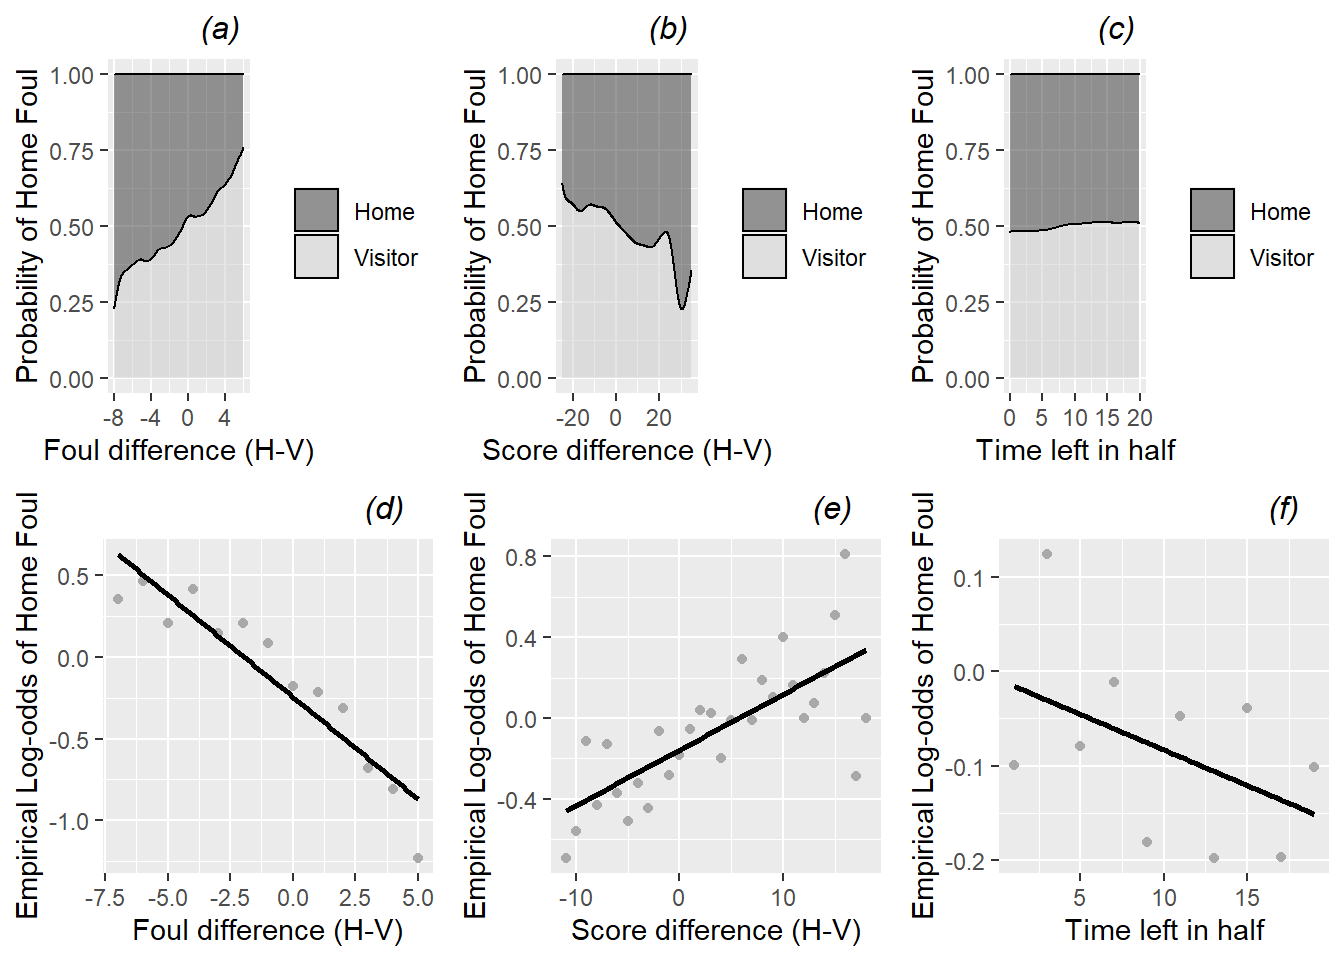 Conditional density and empirical logit plots of the binary model response (foul called on home or visitor) vs. the three continuous Level One covariates (foul differential, score differential, and time remaining).  The dark shading in a conditional density plot shows the proportion of fouls called on the home team for a fixed value of (a) foul differential, (b) score differential, and (c) time remaining.  In empirical logit plots, estimated log odds of a home team foul are calculated for each distinct foul (d) and score (e) differential, except for differentials at the high and low extremes with insufficient data; for time (f), estimated log odds are calculated for two-minute time intervals and plotted against the midpoints of those intervals.